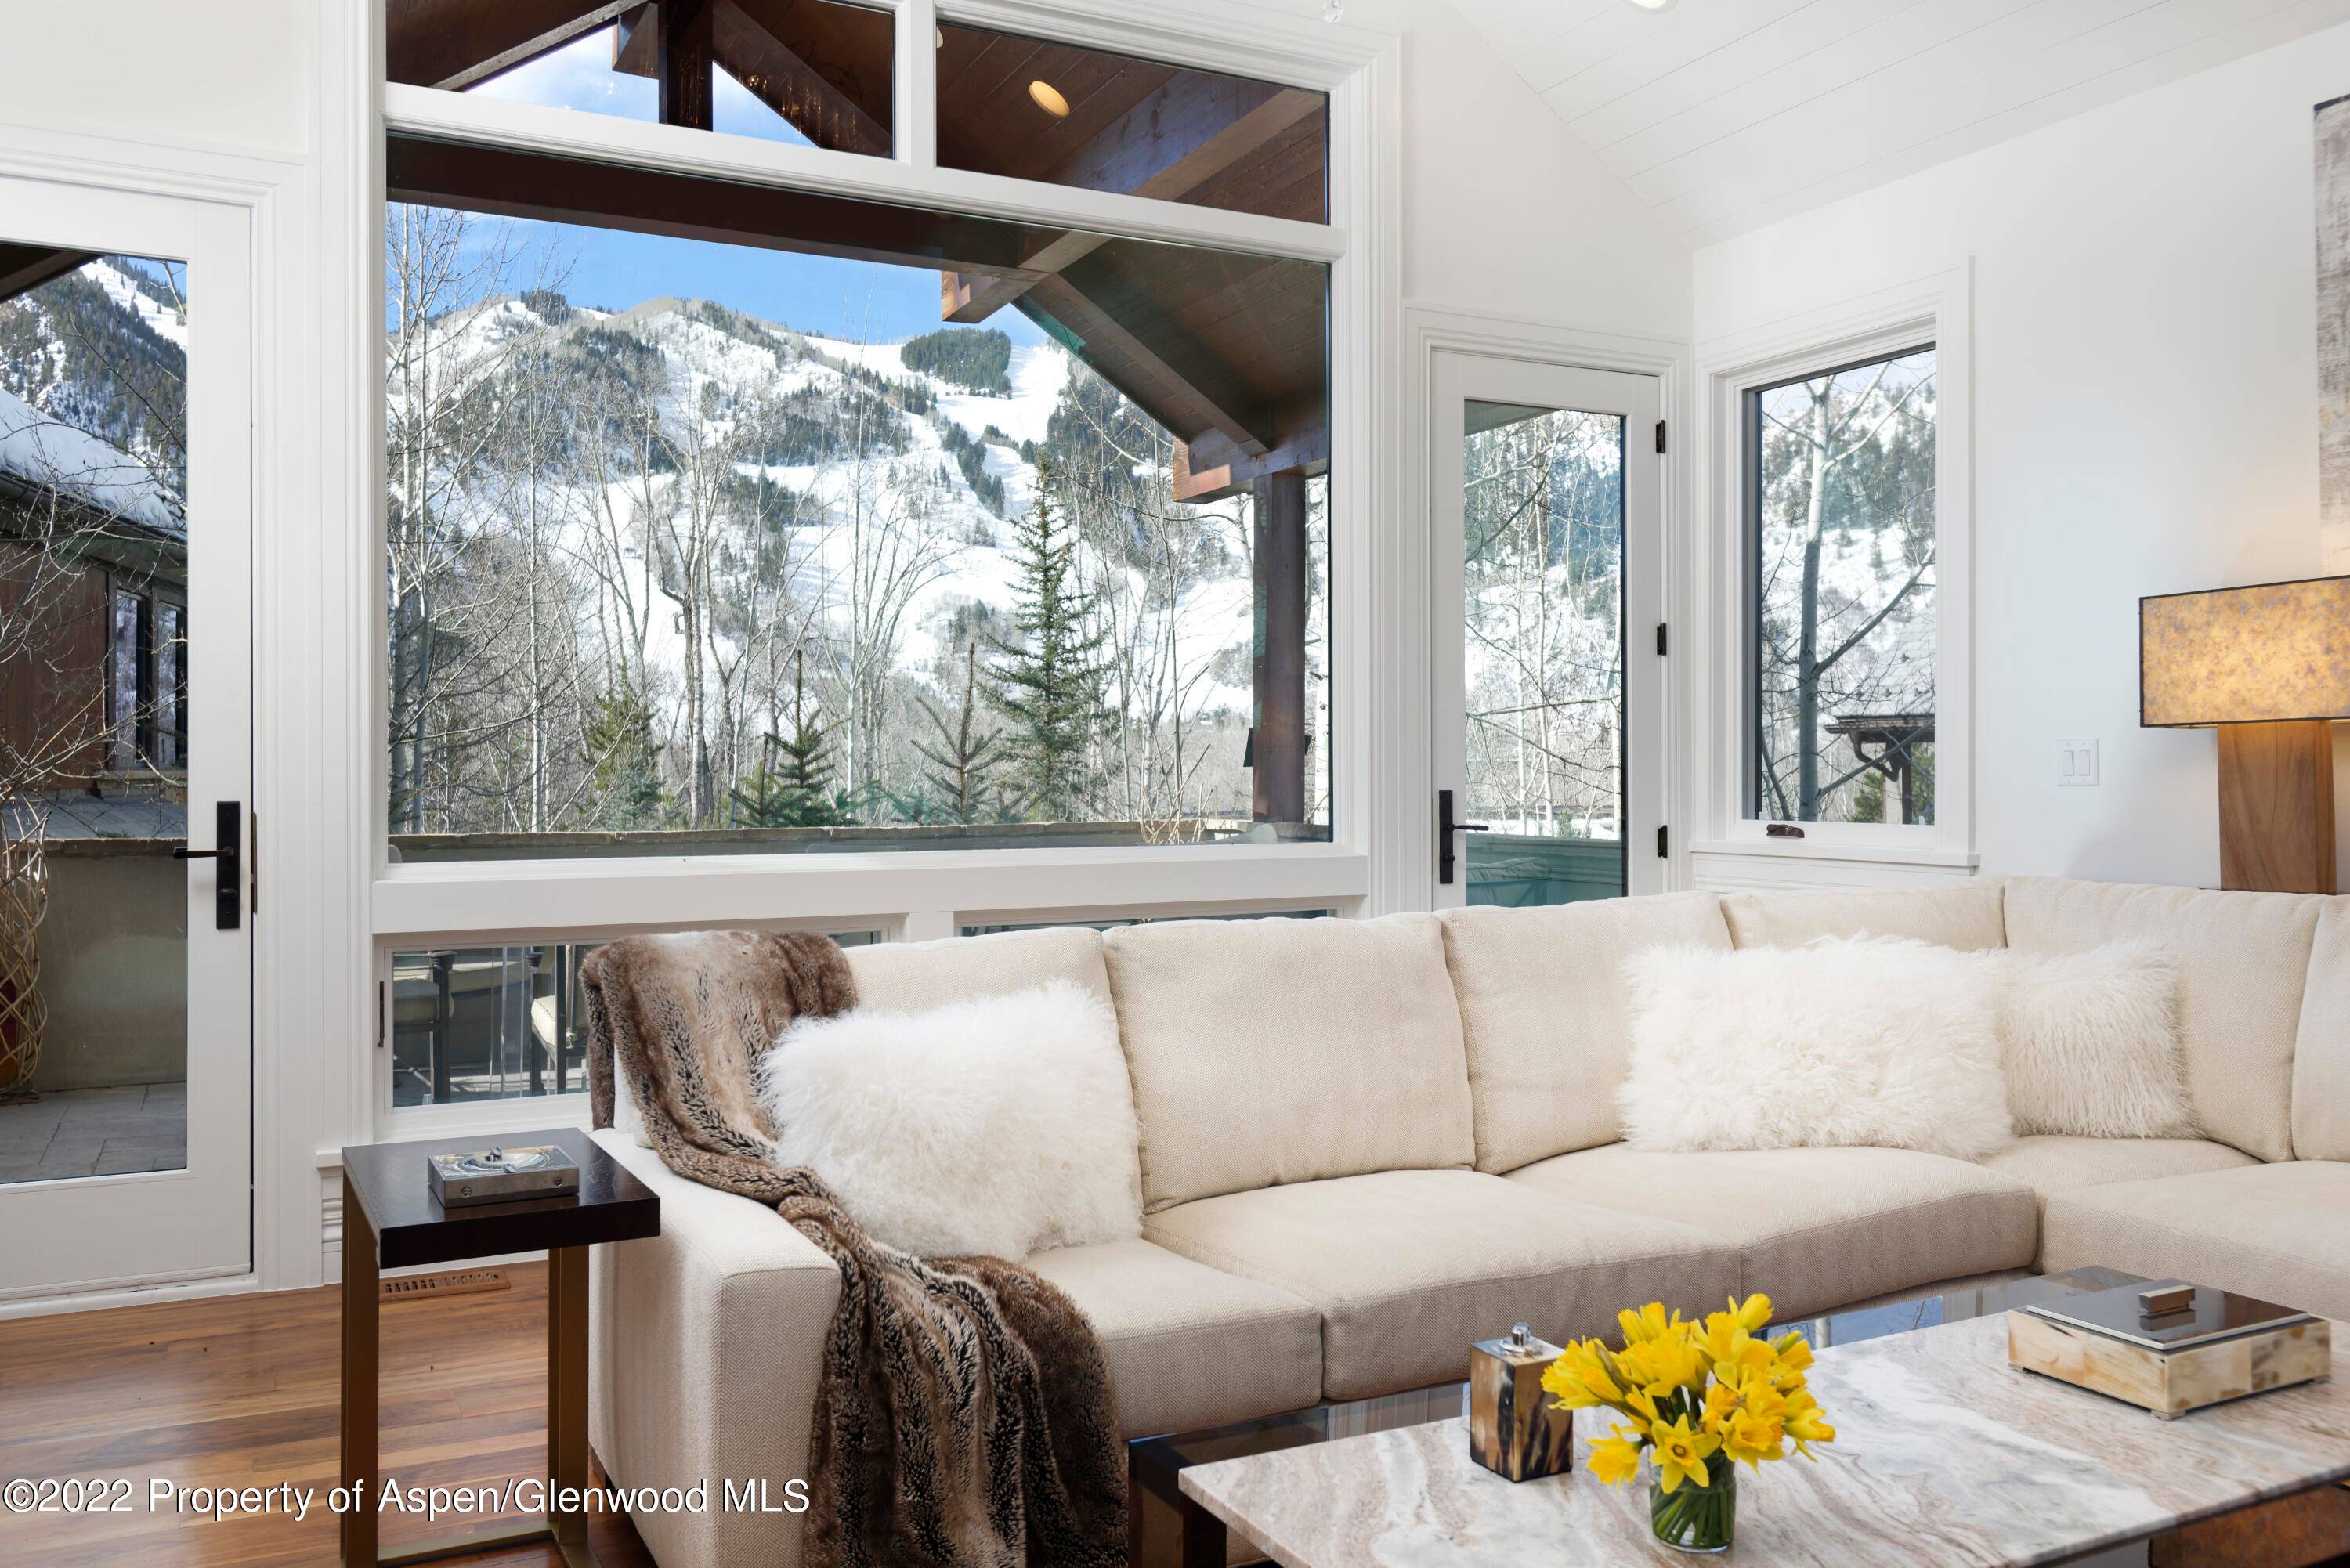 Welcome to your dream home with direct views of Aspen Mountain, find this recently renovated 2019 contemporary retreat in Aspen's Fox Crossing neighborhood.